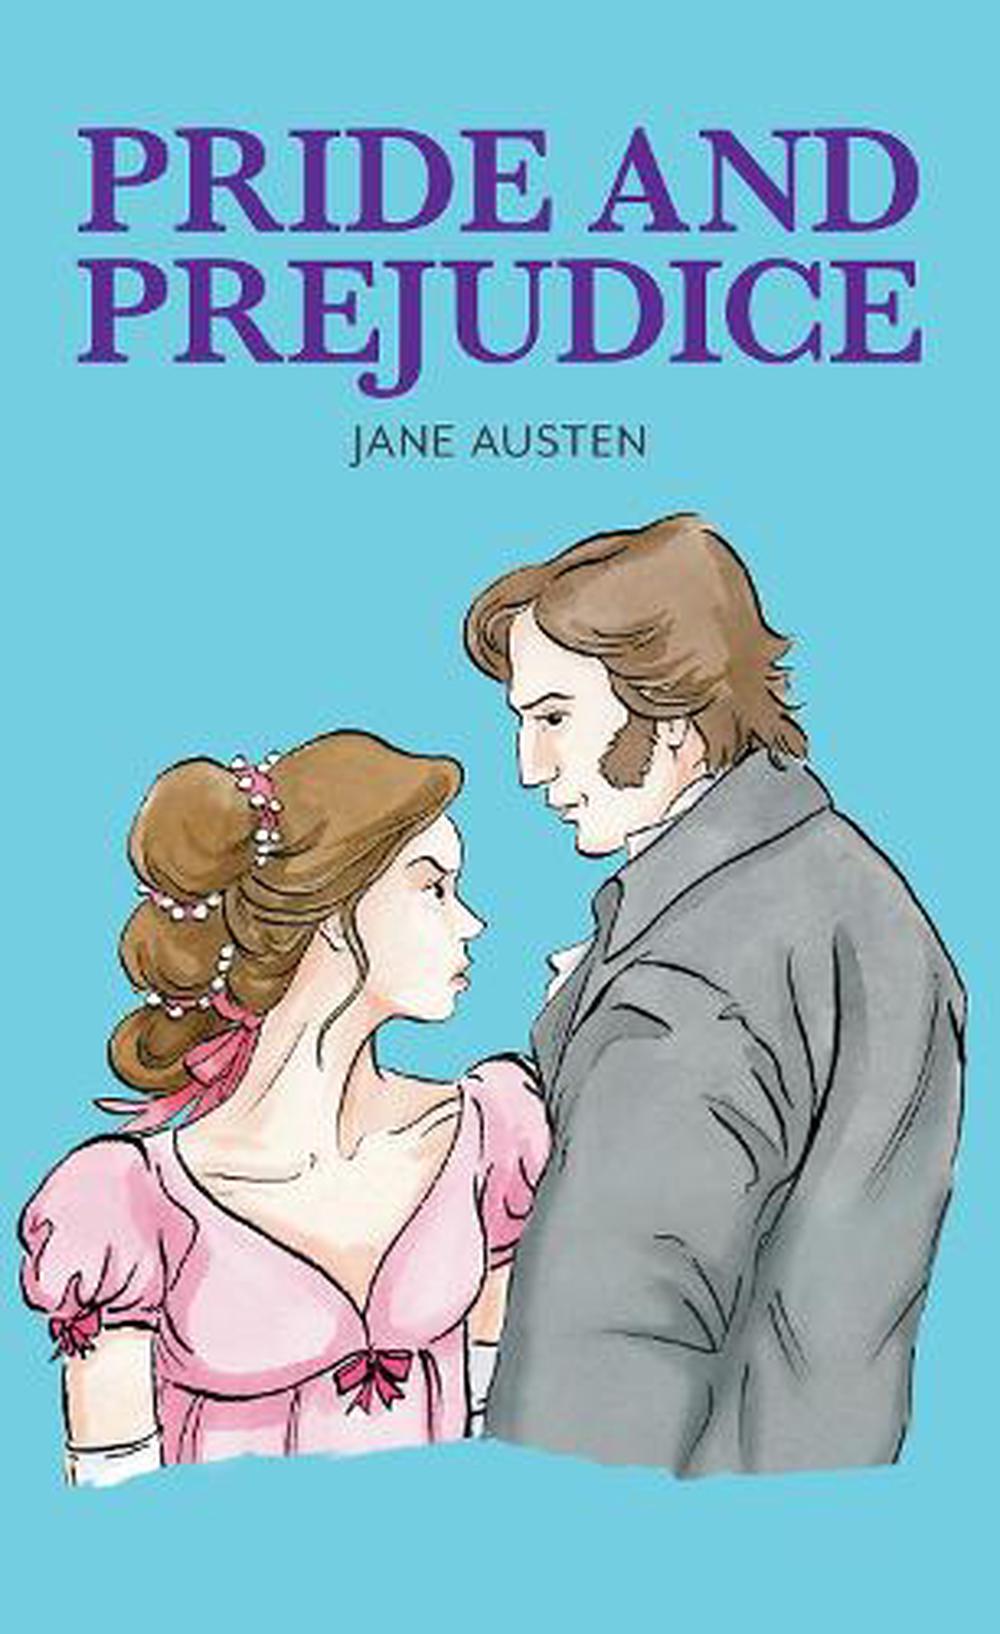 book review of pride and prejudice in 100 words